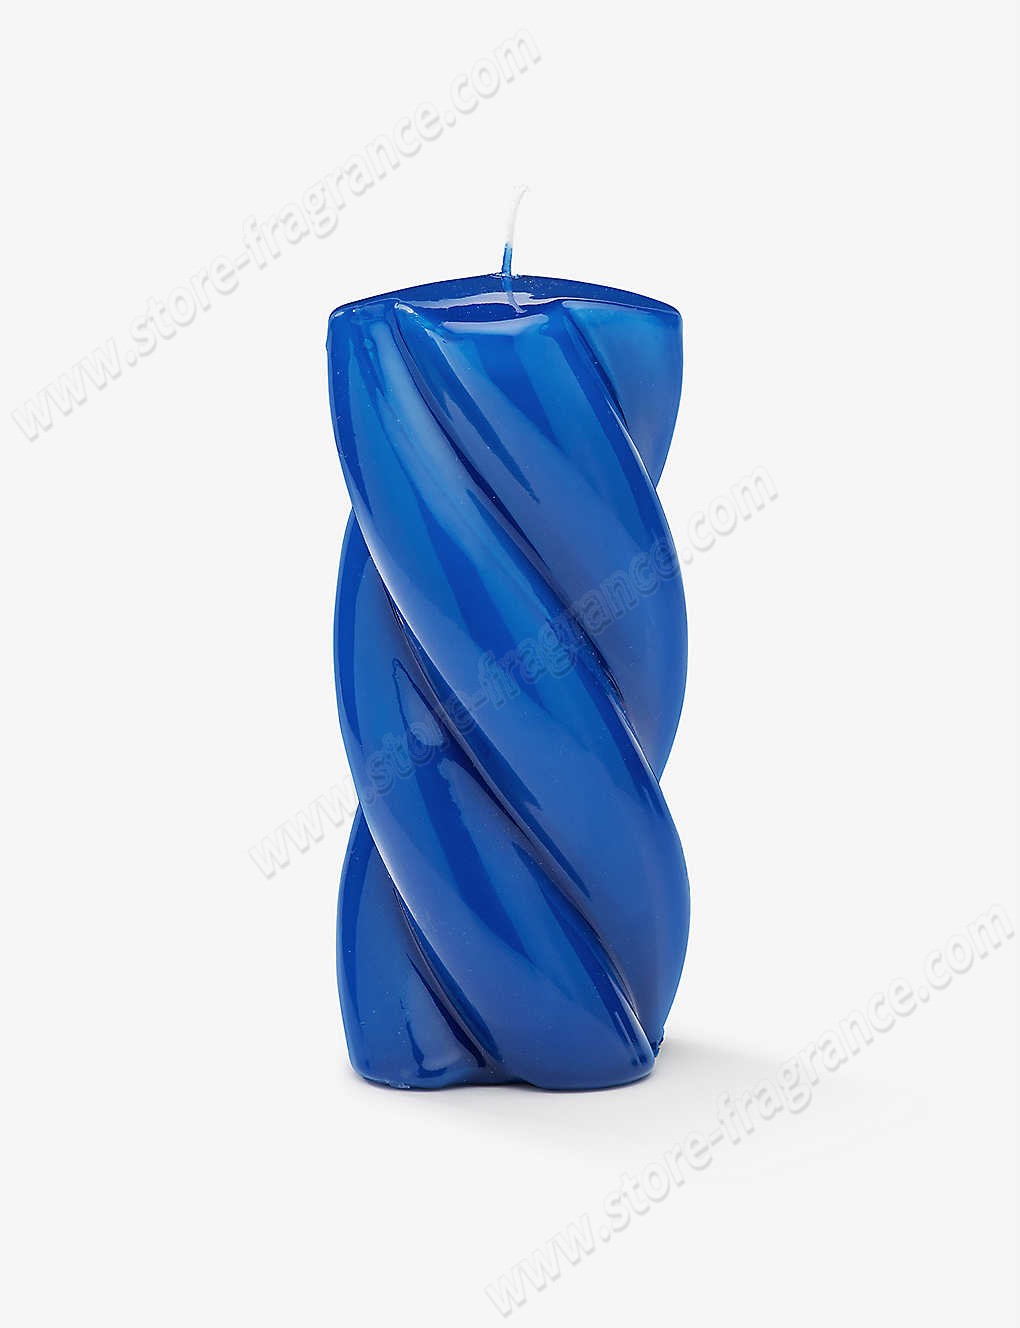 ANNA + NINA/Blunt Twisted paraffin candle 14cm Limit Offer - -0